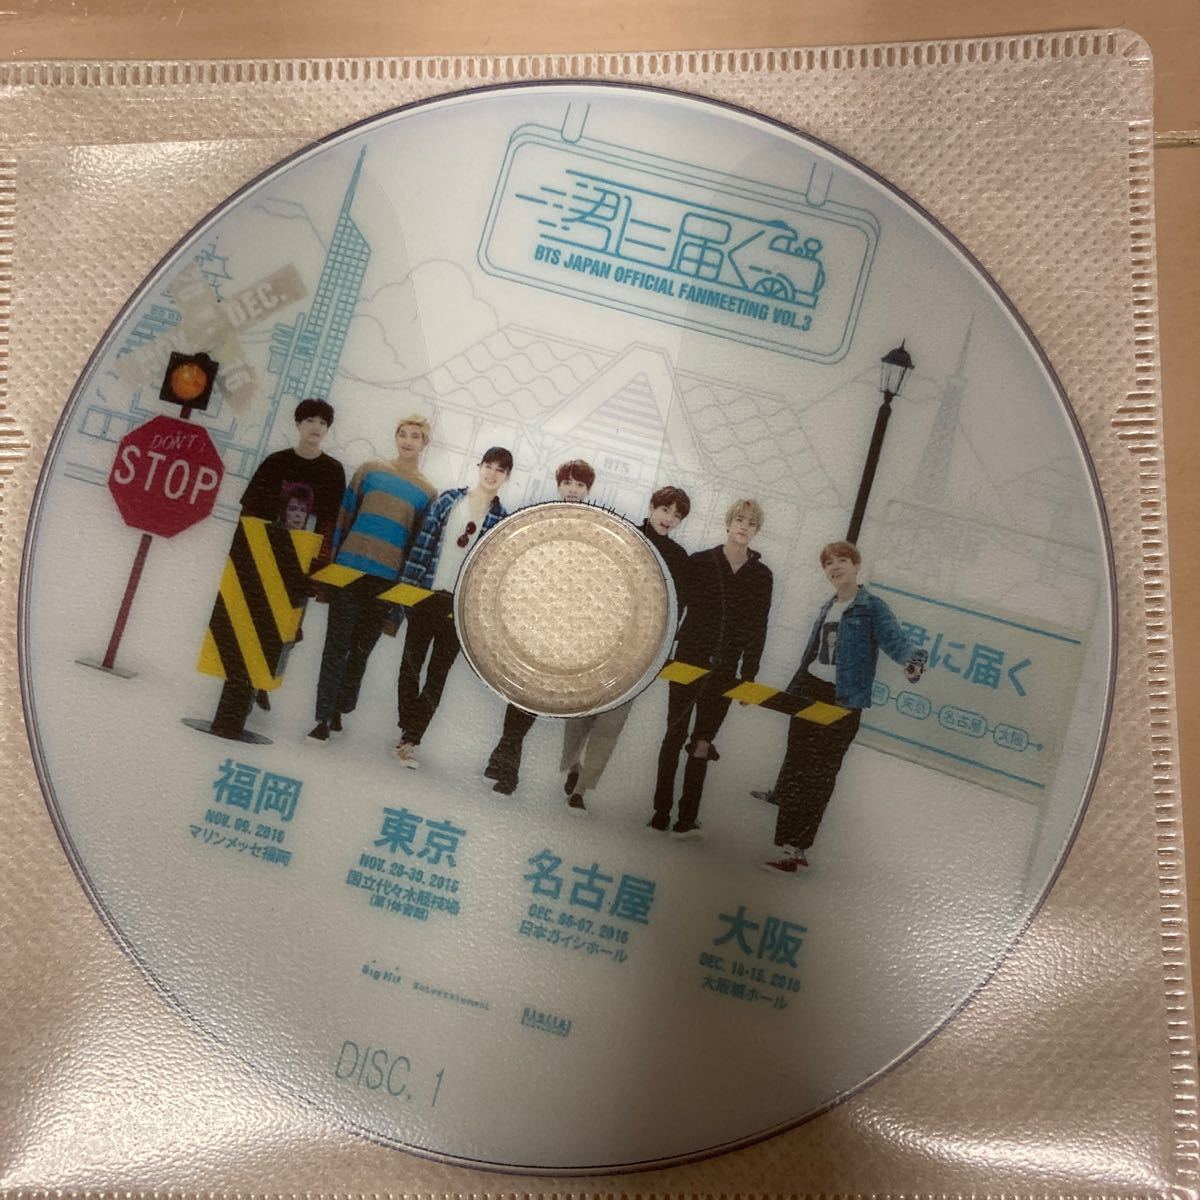 BTS 君に届く DVD Japan official fanmeeting vol 3｜PayPayフリマ